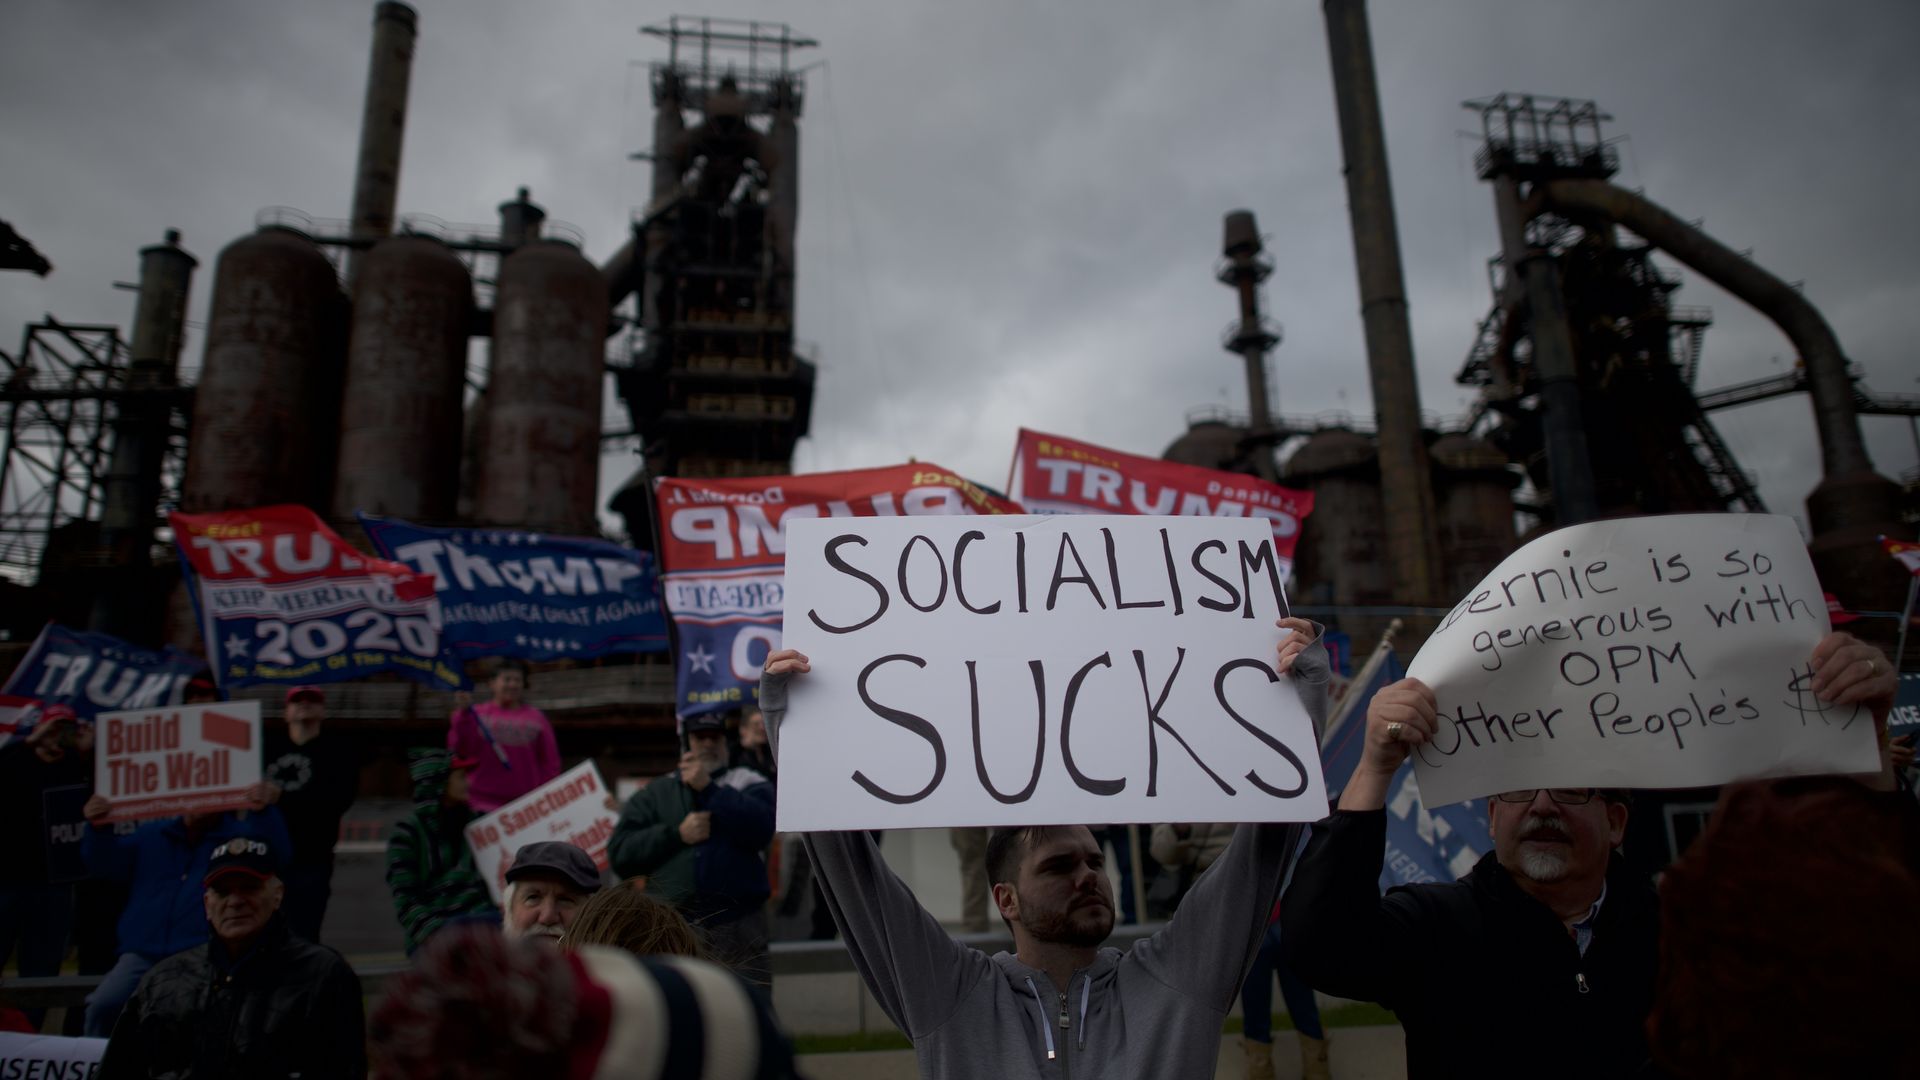 Donald Trump supporters demonstrate against Sen. Bernie Sanders with a "Socialism Sucks" sign.